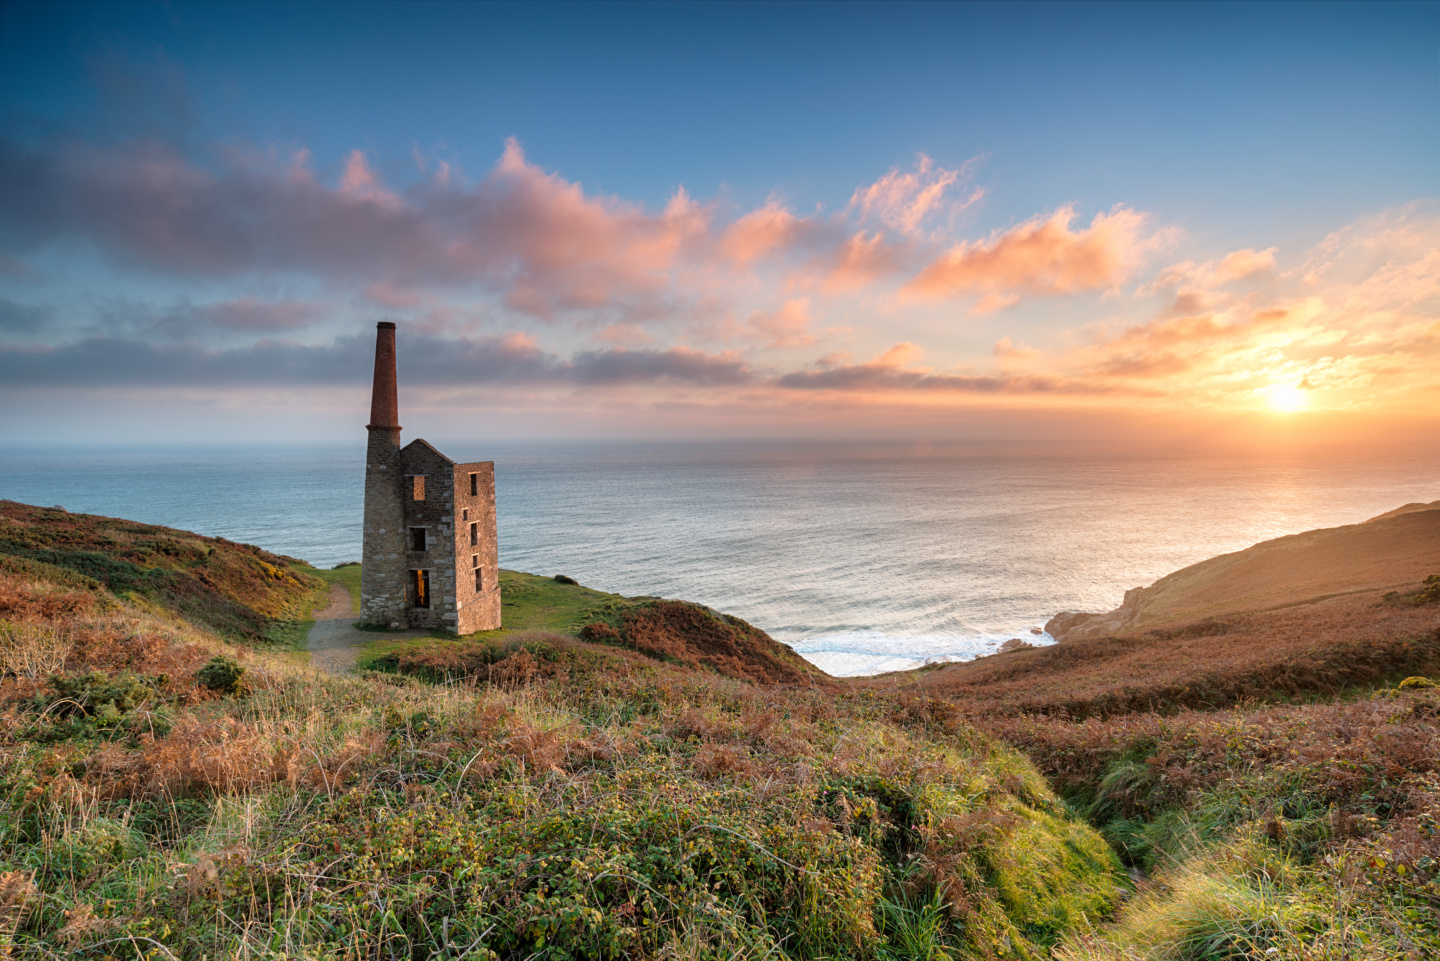 Stunning sunset on the South West Coast Path as it passes the ruins of the Wheal Prosper engine house on cliffs at Rinsey Head near Porthleven in Cornwall